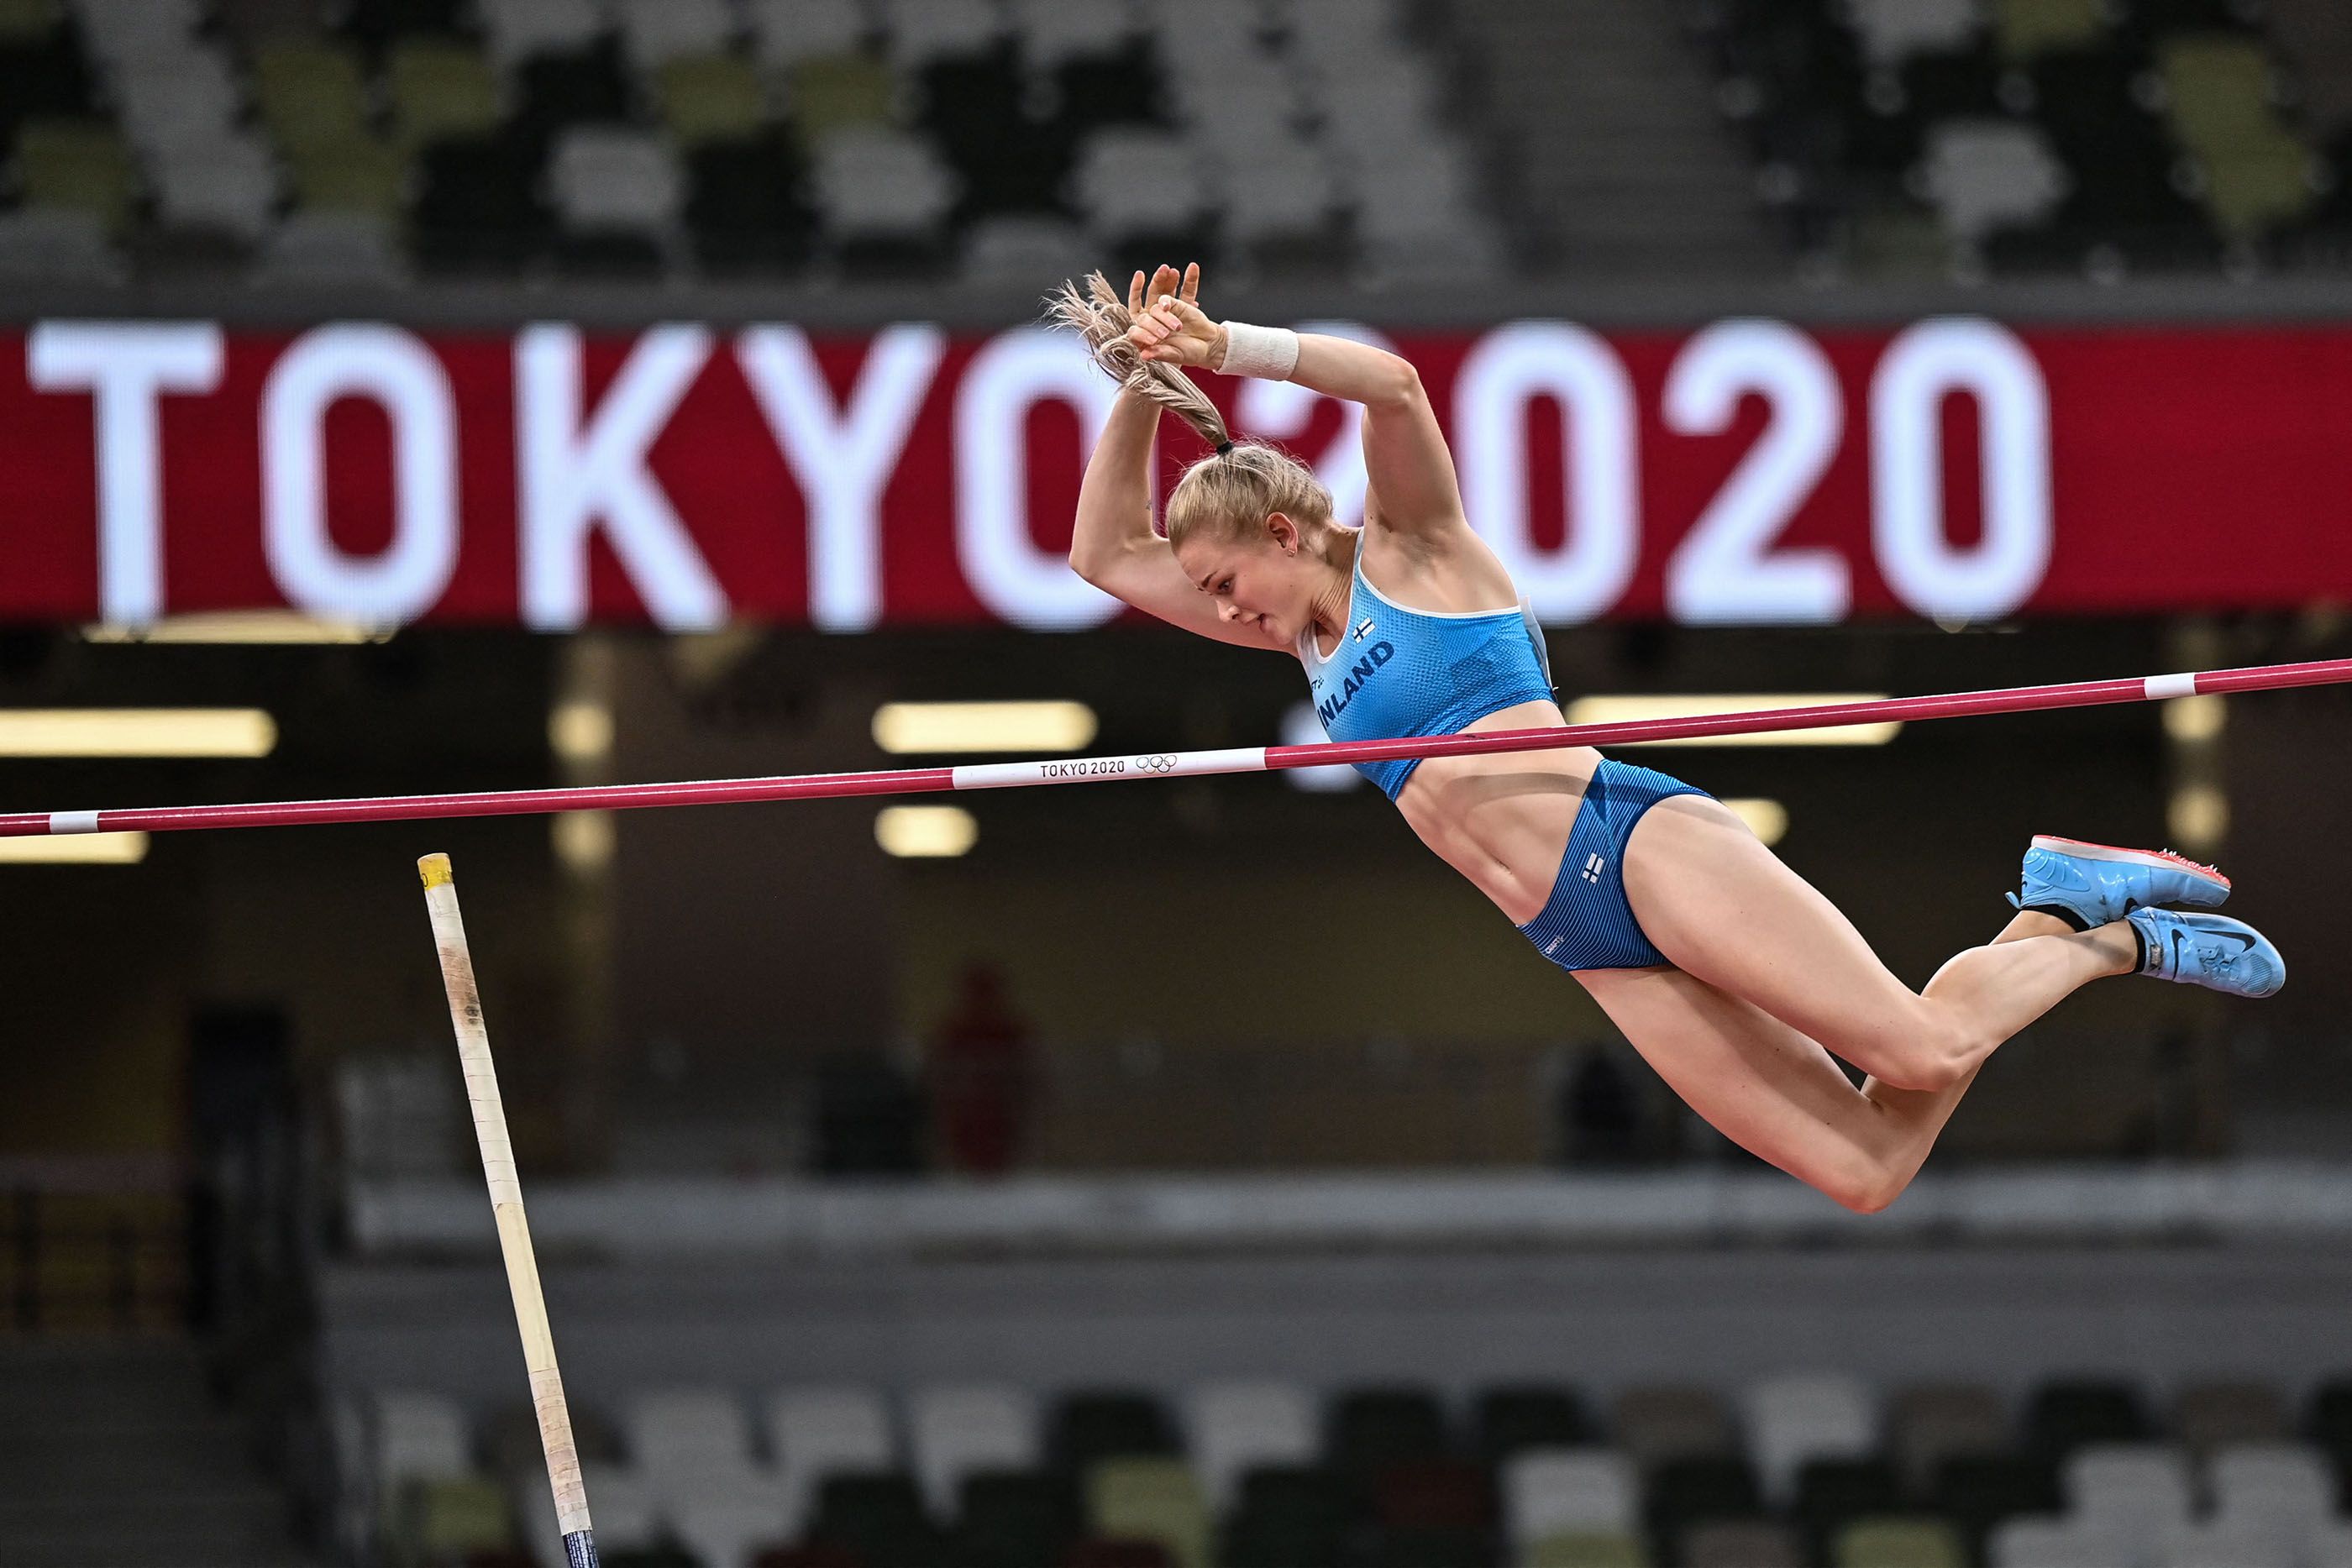 Wilma Murto competes at the Olympic Games in Tokyo